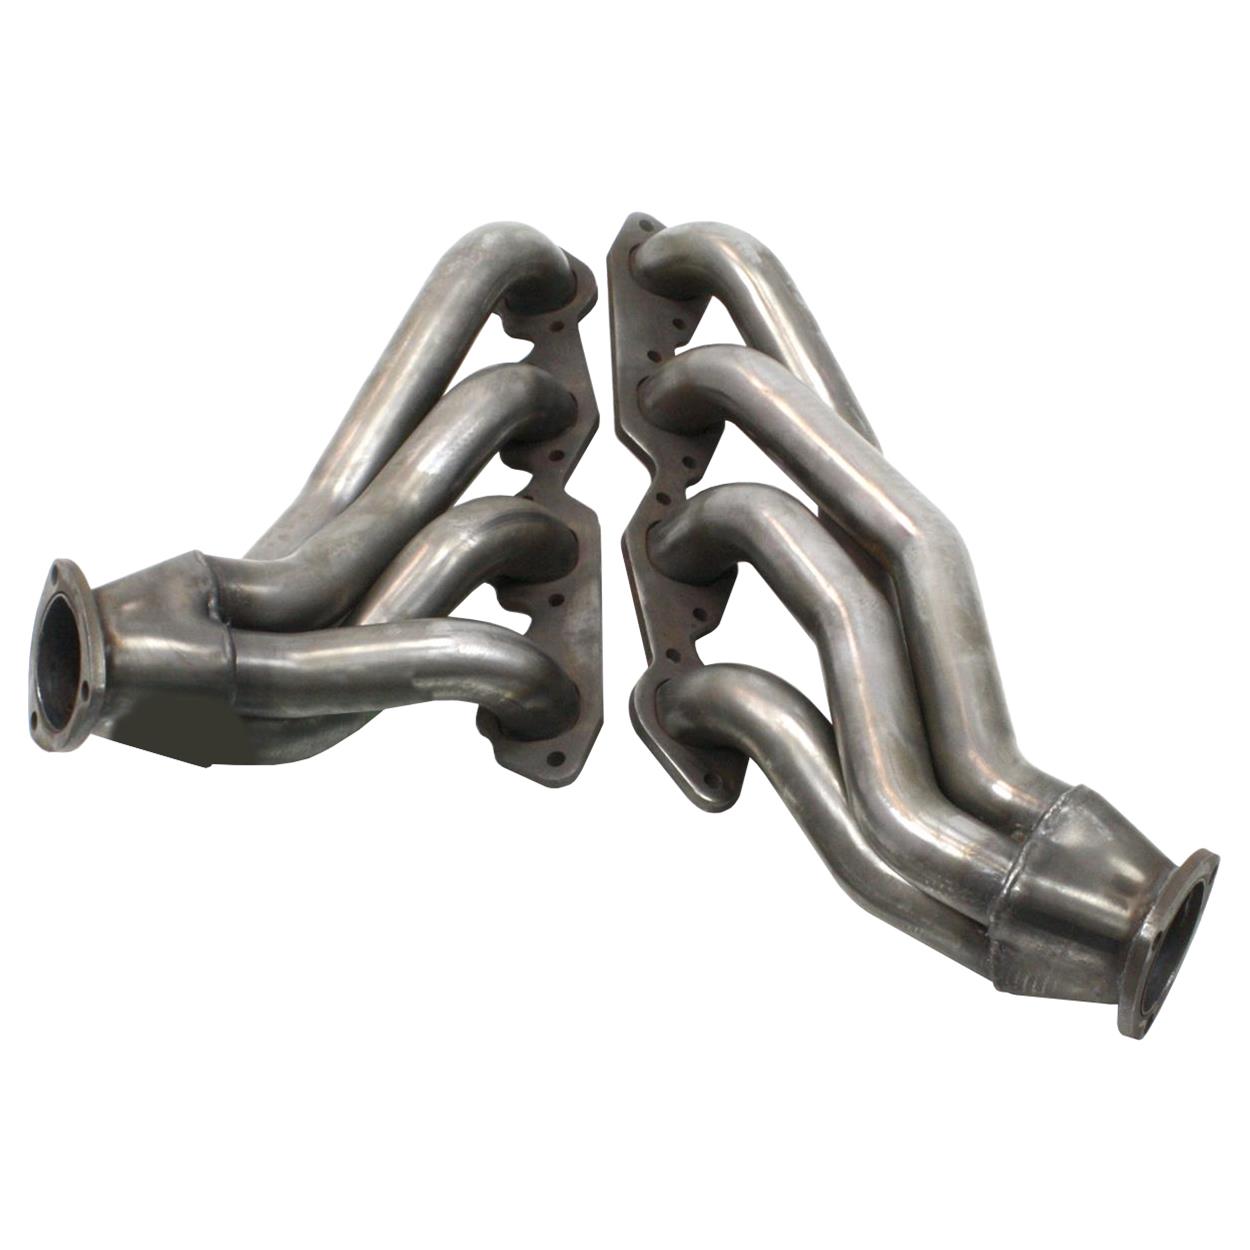 Patriot Exhaust H8036-1 1 1/2 Clippster Exhaust Header for Small Block Chevrolet 82-95